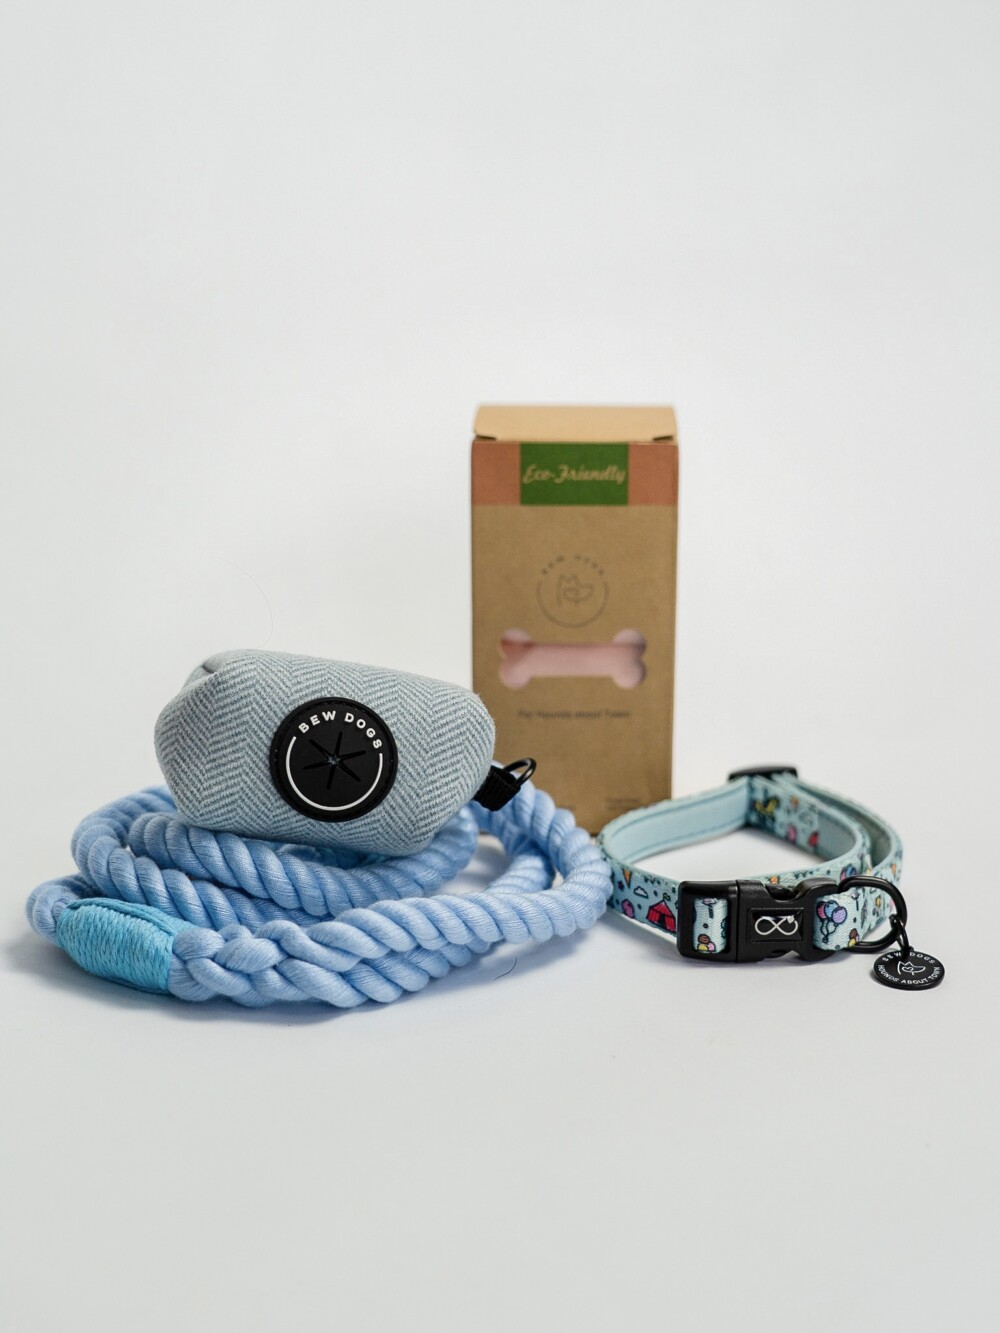 A bundle of products, including a sky blue rope lead, blue herringbone poop bag holder, a box of eco friendly poo bags and a sky blue collar, against a white background